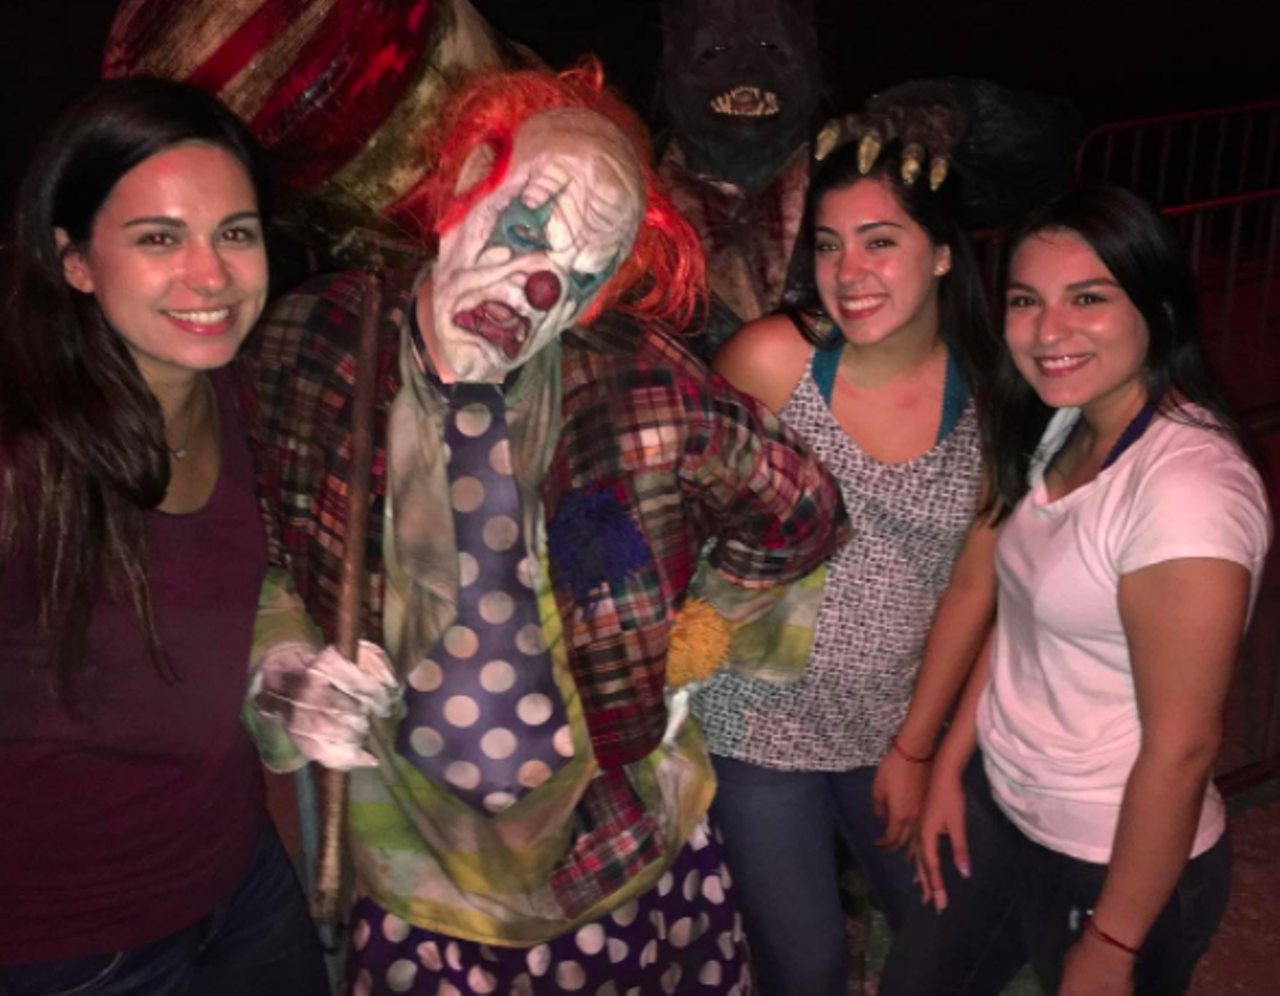 13th Floor
1203 E Commerce St., (210) 910-6450, 13thfloorsanantonio.com
Whether you’re a haunted house champ or a wuss, you’ve got to check out 13th Floor. It was voted the best haunted house in the country.
Photo via Instagram, _dreeaaxo